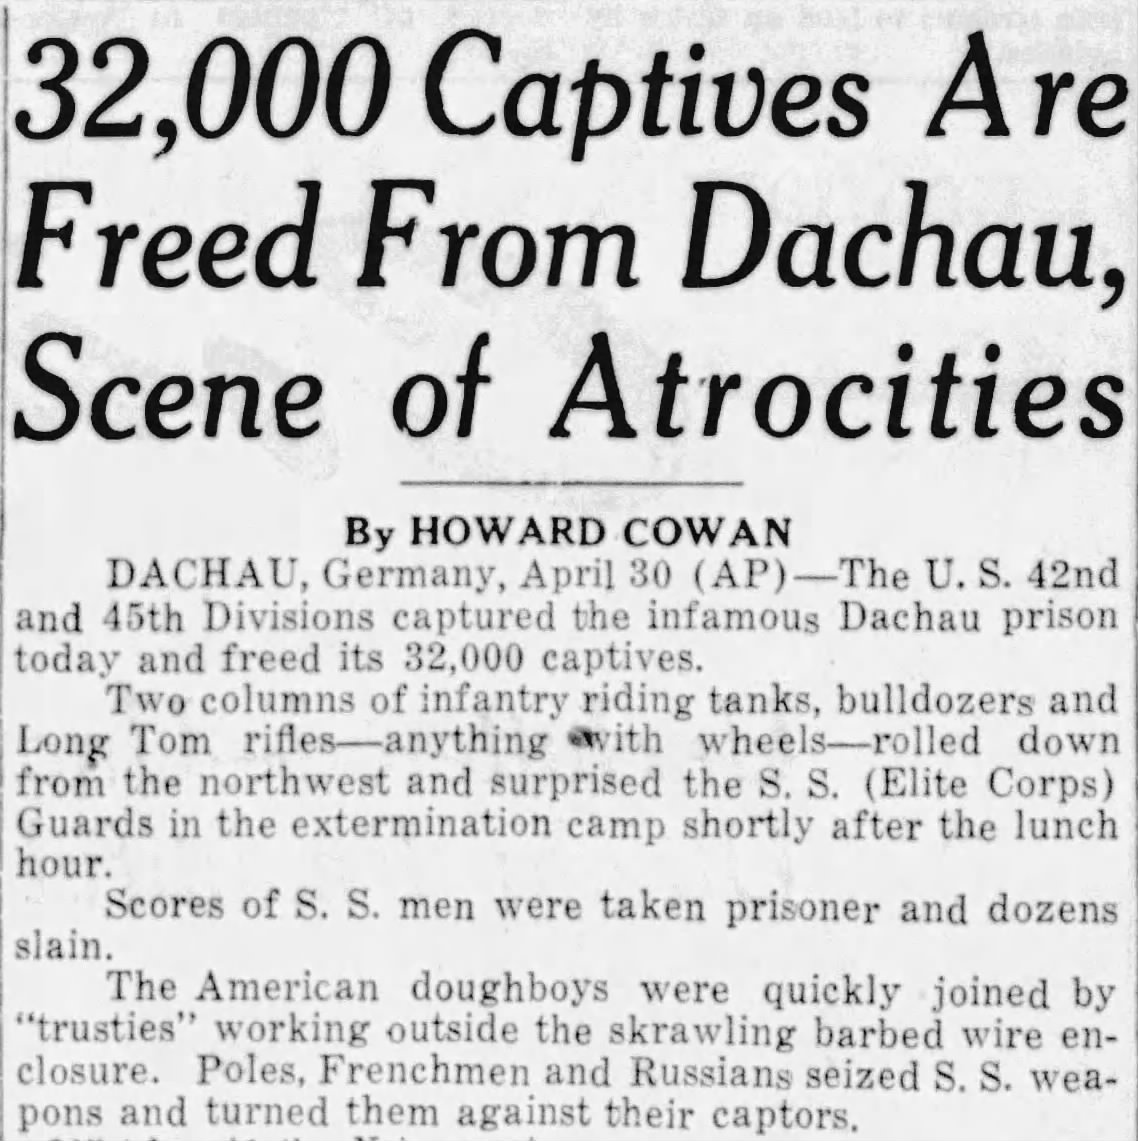 32,000 Captives are Freed from Dachau, Scene of Atrocities